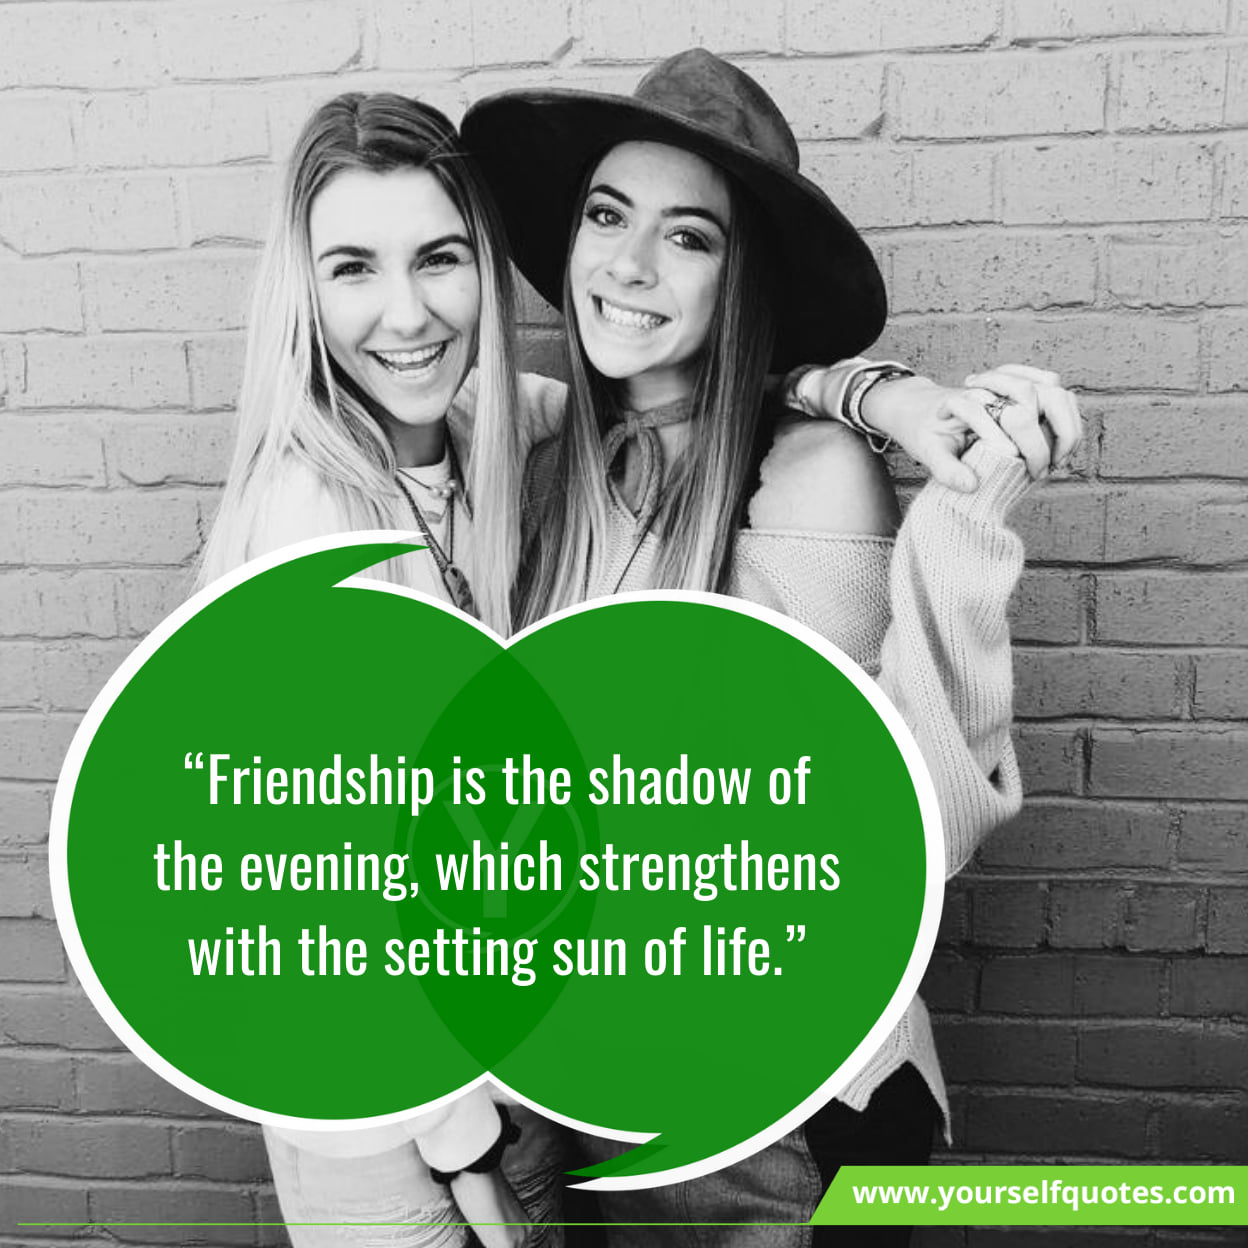 Motivational Quotes On Friendship Day